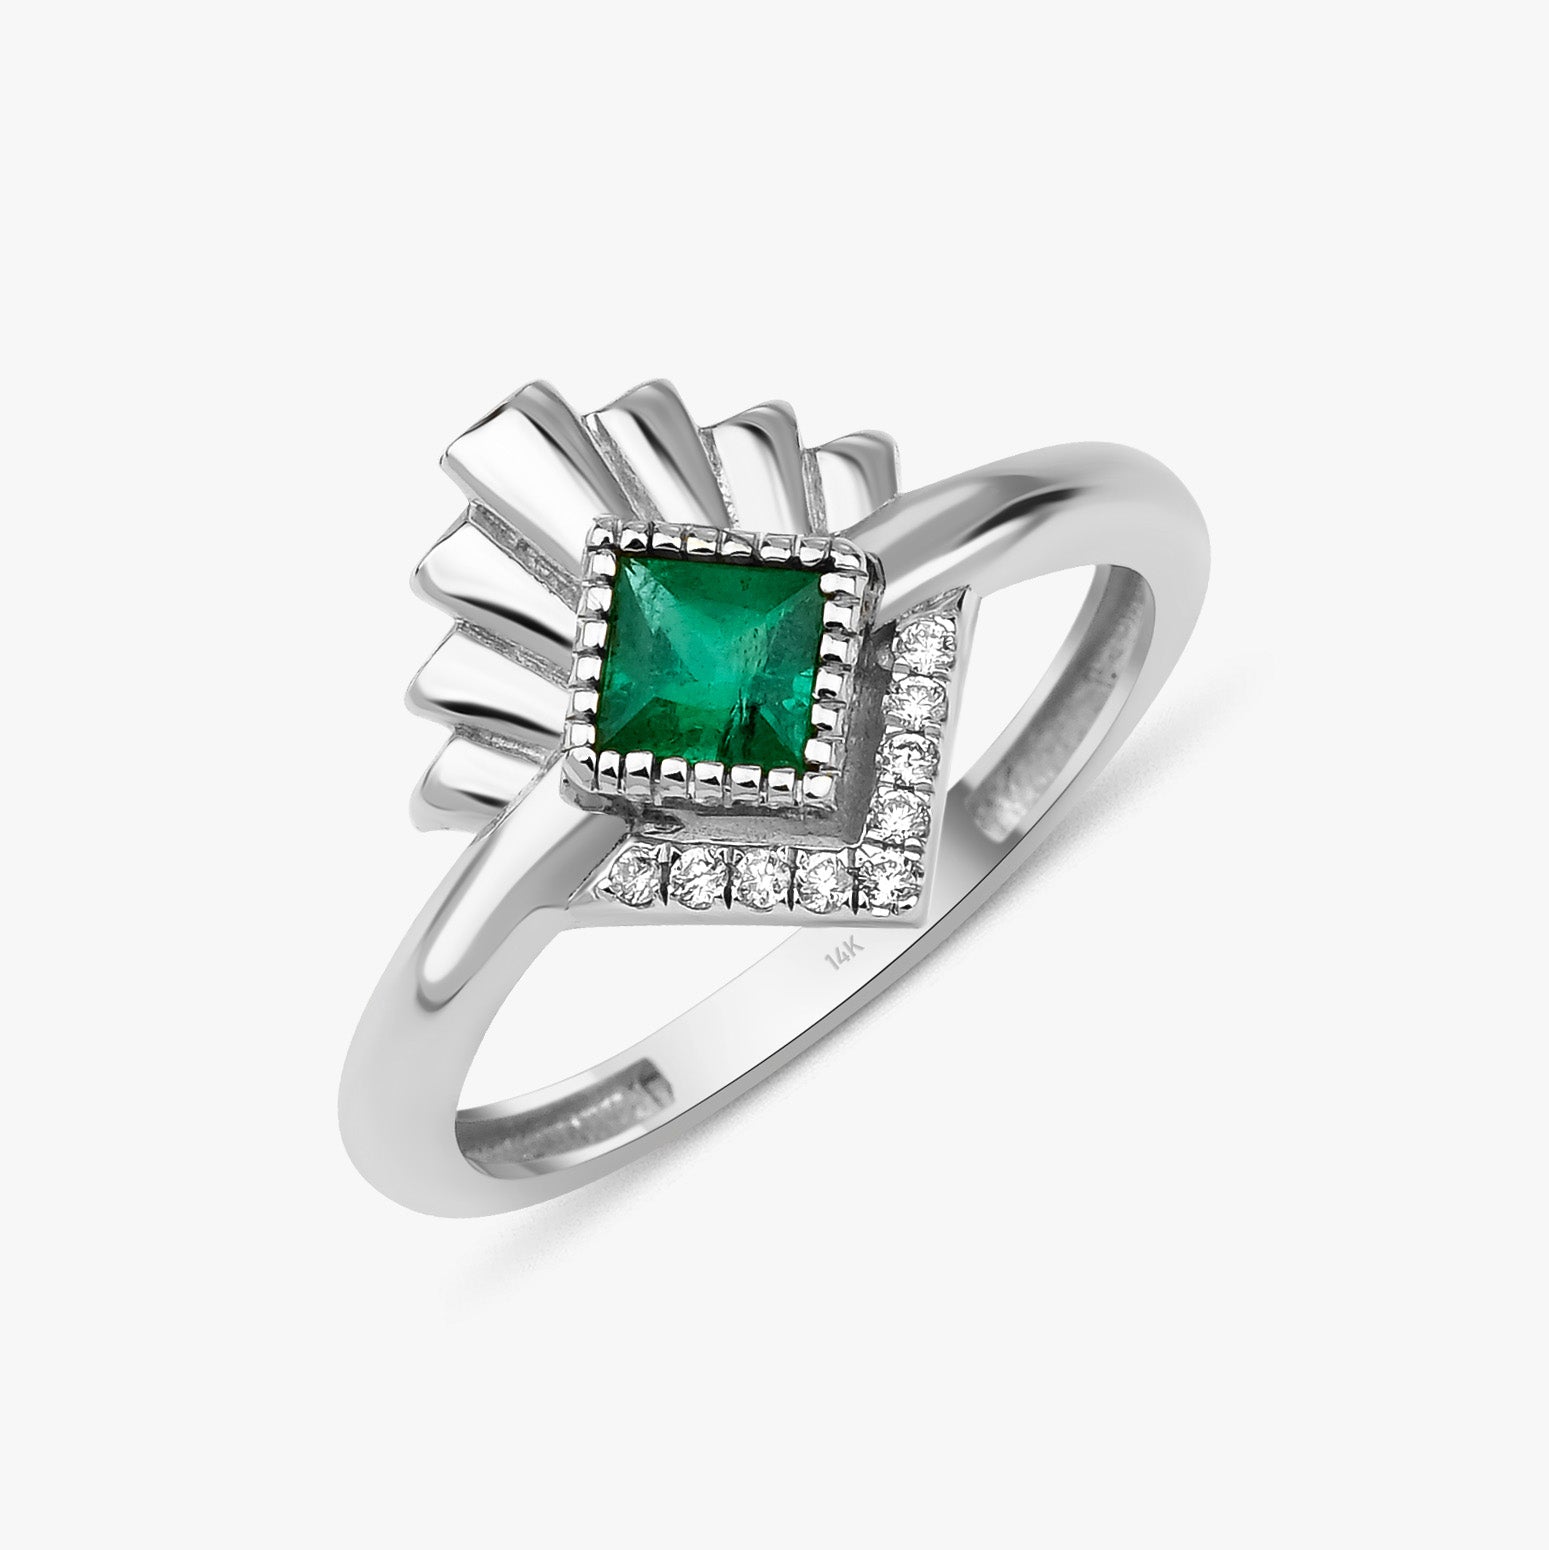 Princess Cut Emerald and Diamond Ring in 14K Gold